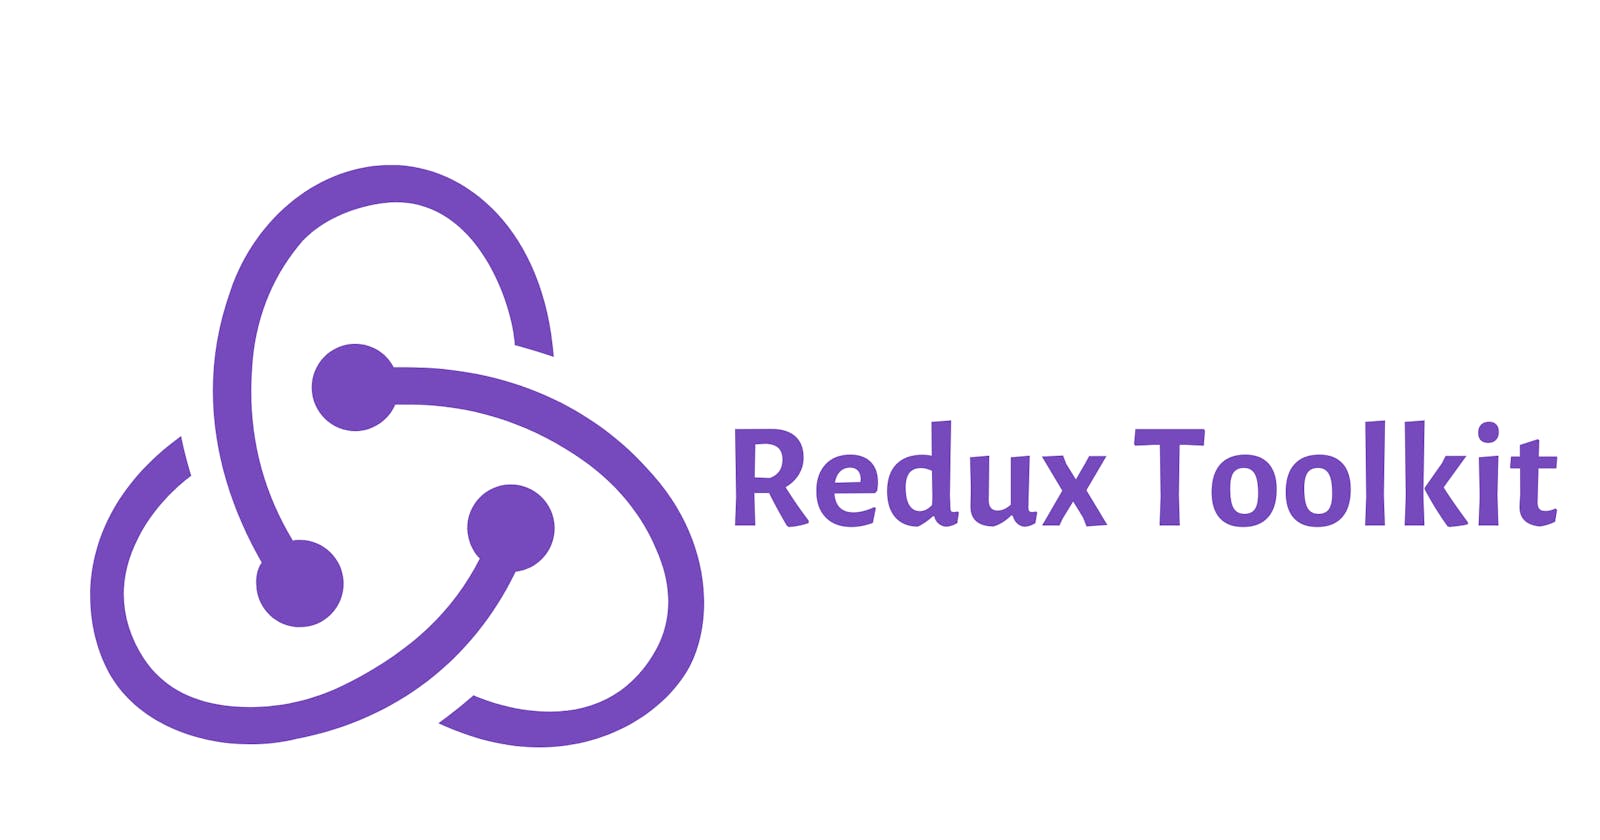 Redux Toolkit: A More Concise Approach To Dealing With State Management